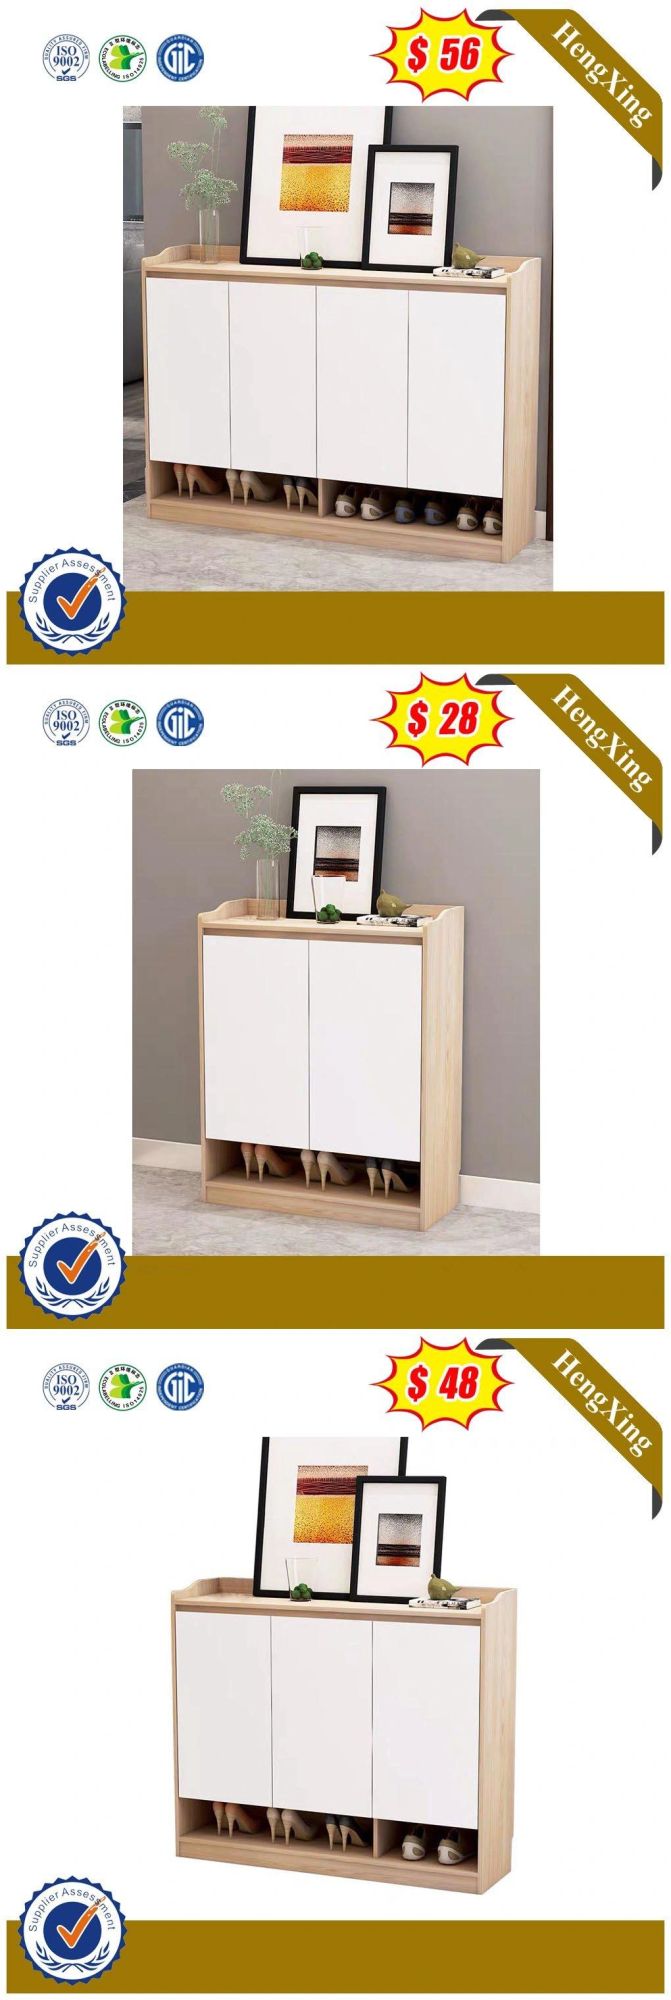 Wooden Melamine Laminated Board Baby Products Storage Cabinet Modern Home Bedroom Furniture Shoe Racks Cabinets